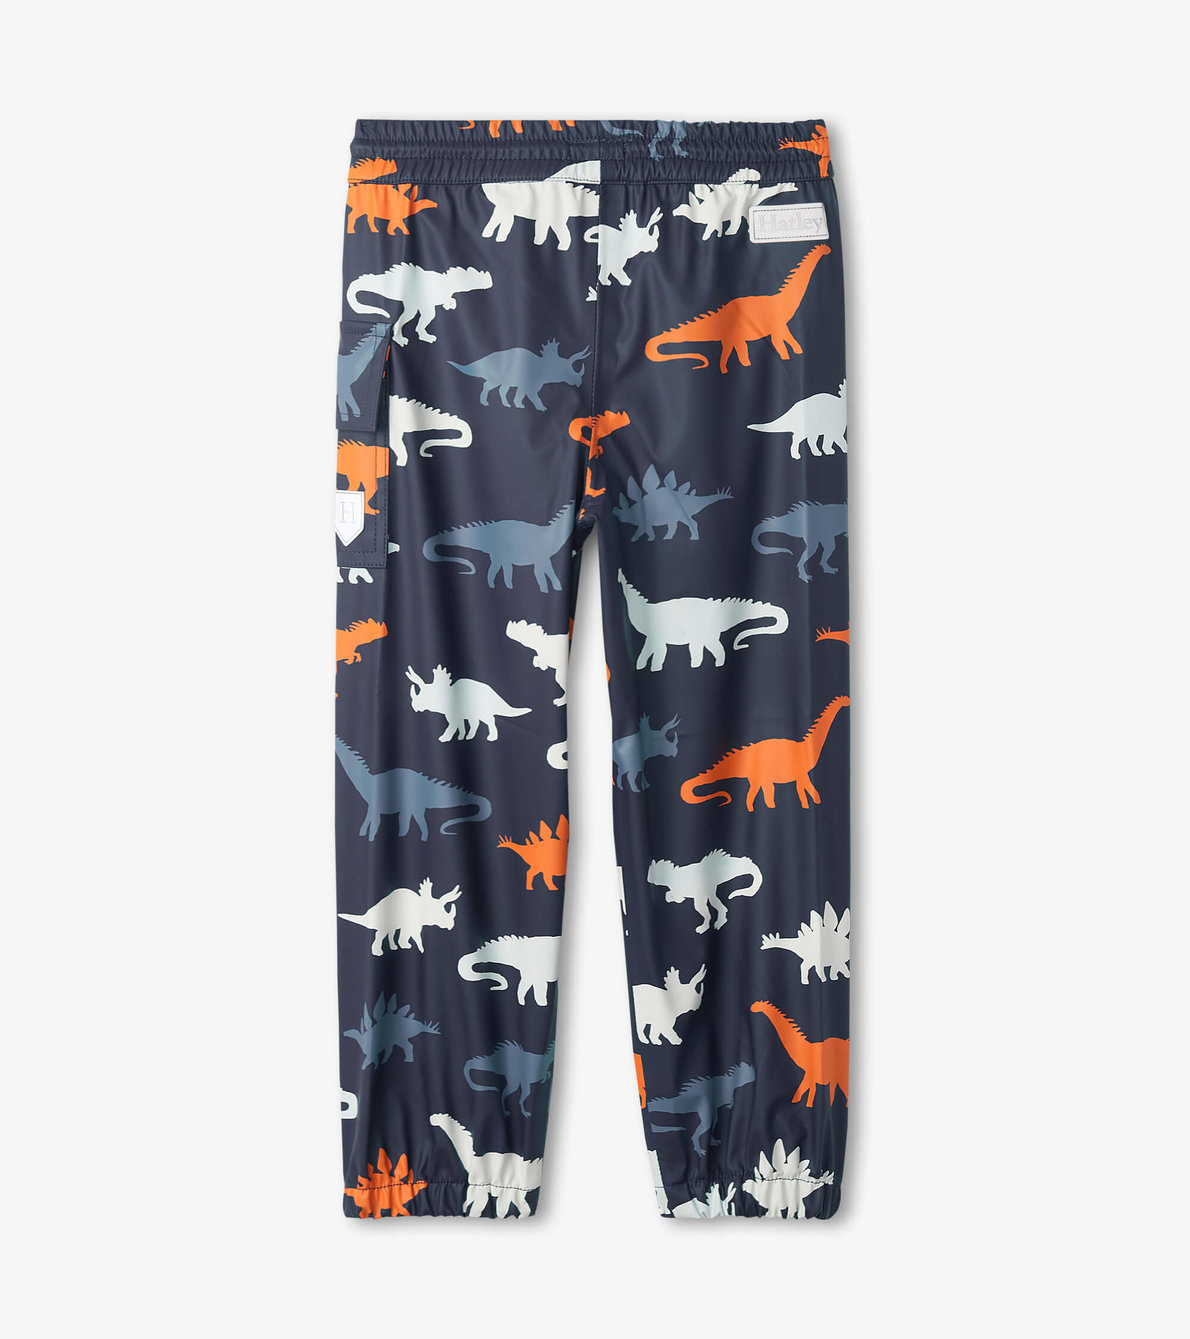 View larger image of Dino Silhouettes Colour Changing Splash Pants